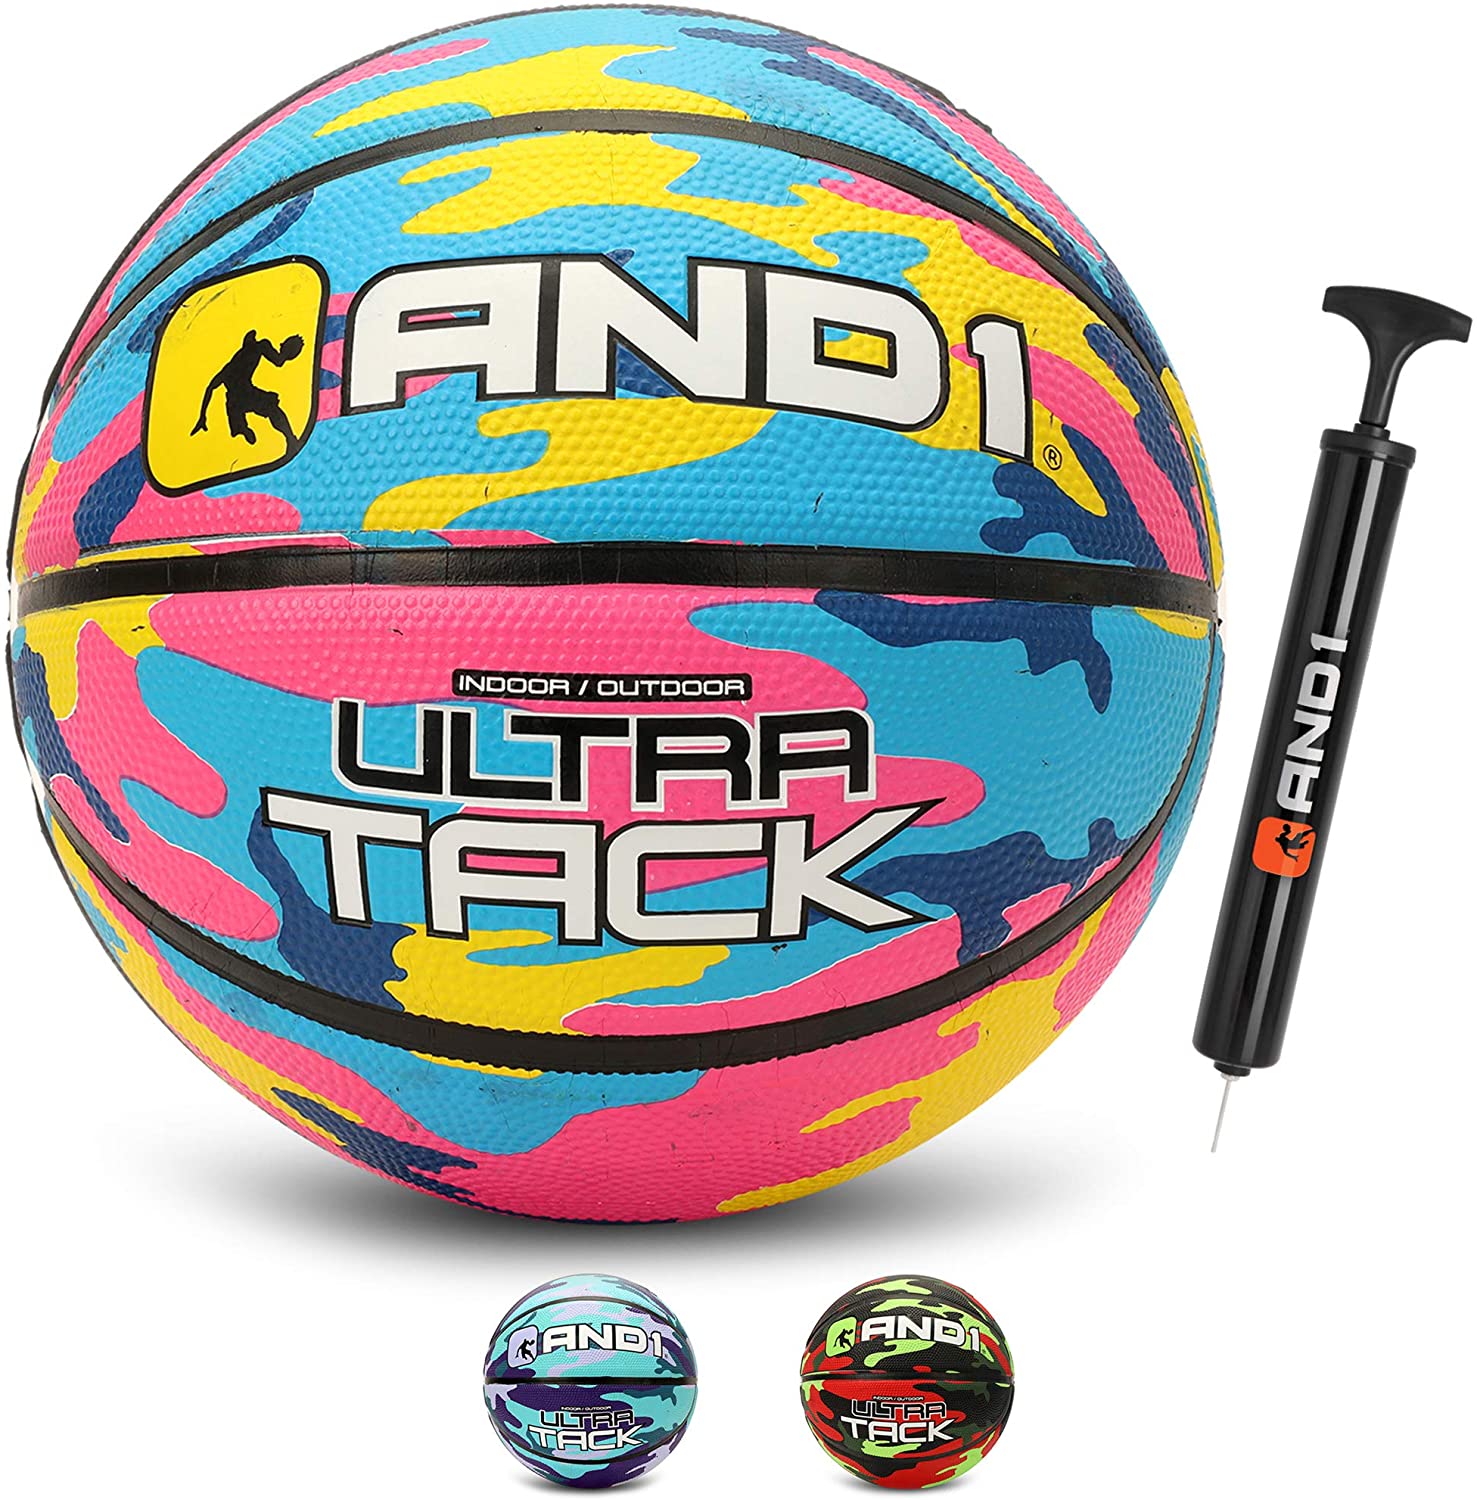 AND1 Ultra Grip Advanced Premium Rubber Basketball & Pump, Pink & Yellow, 29.5" - image 1 of 3